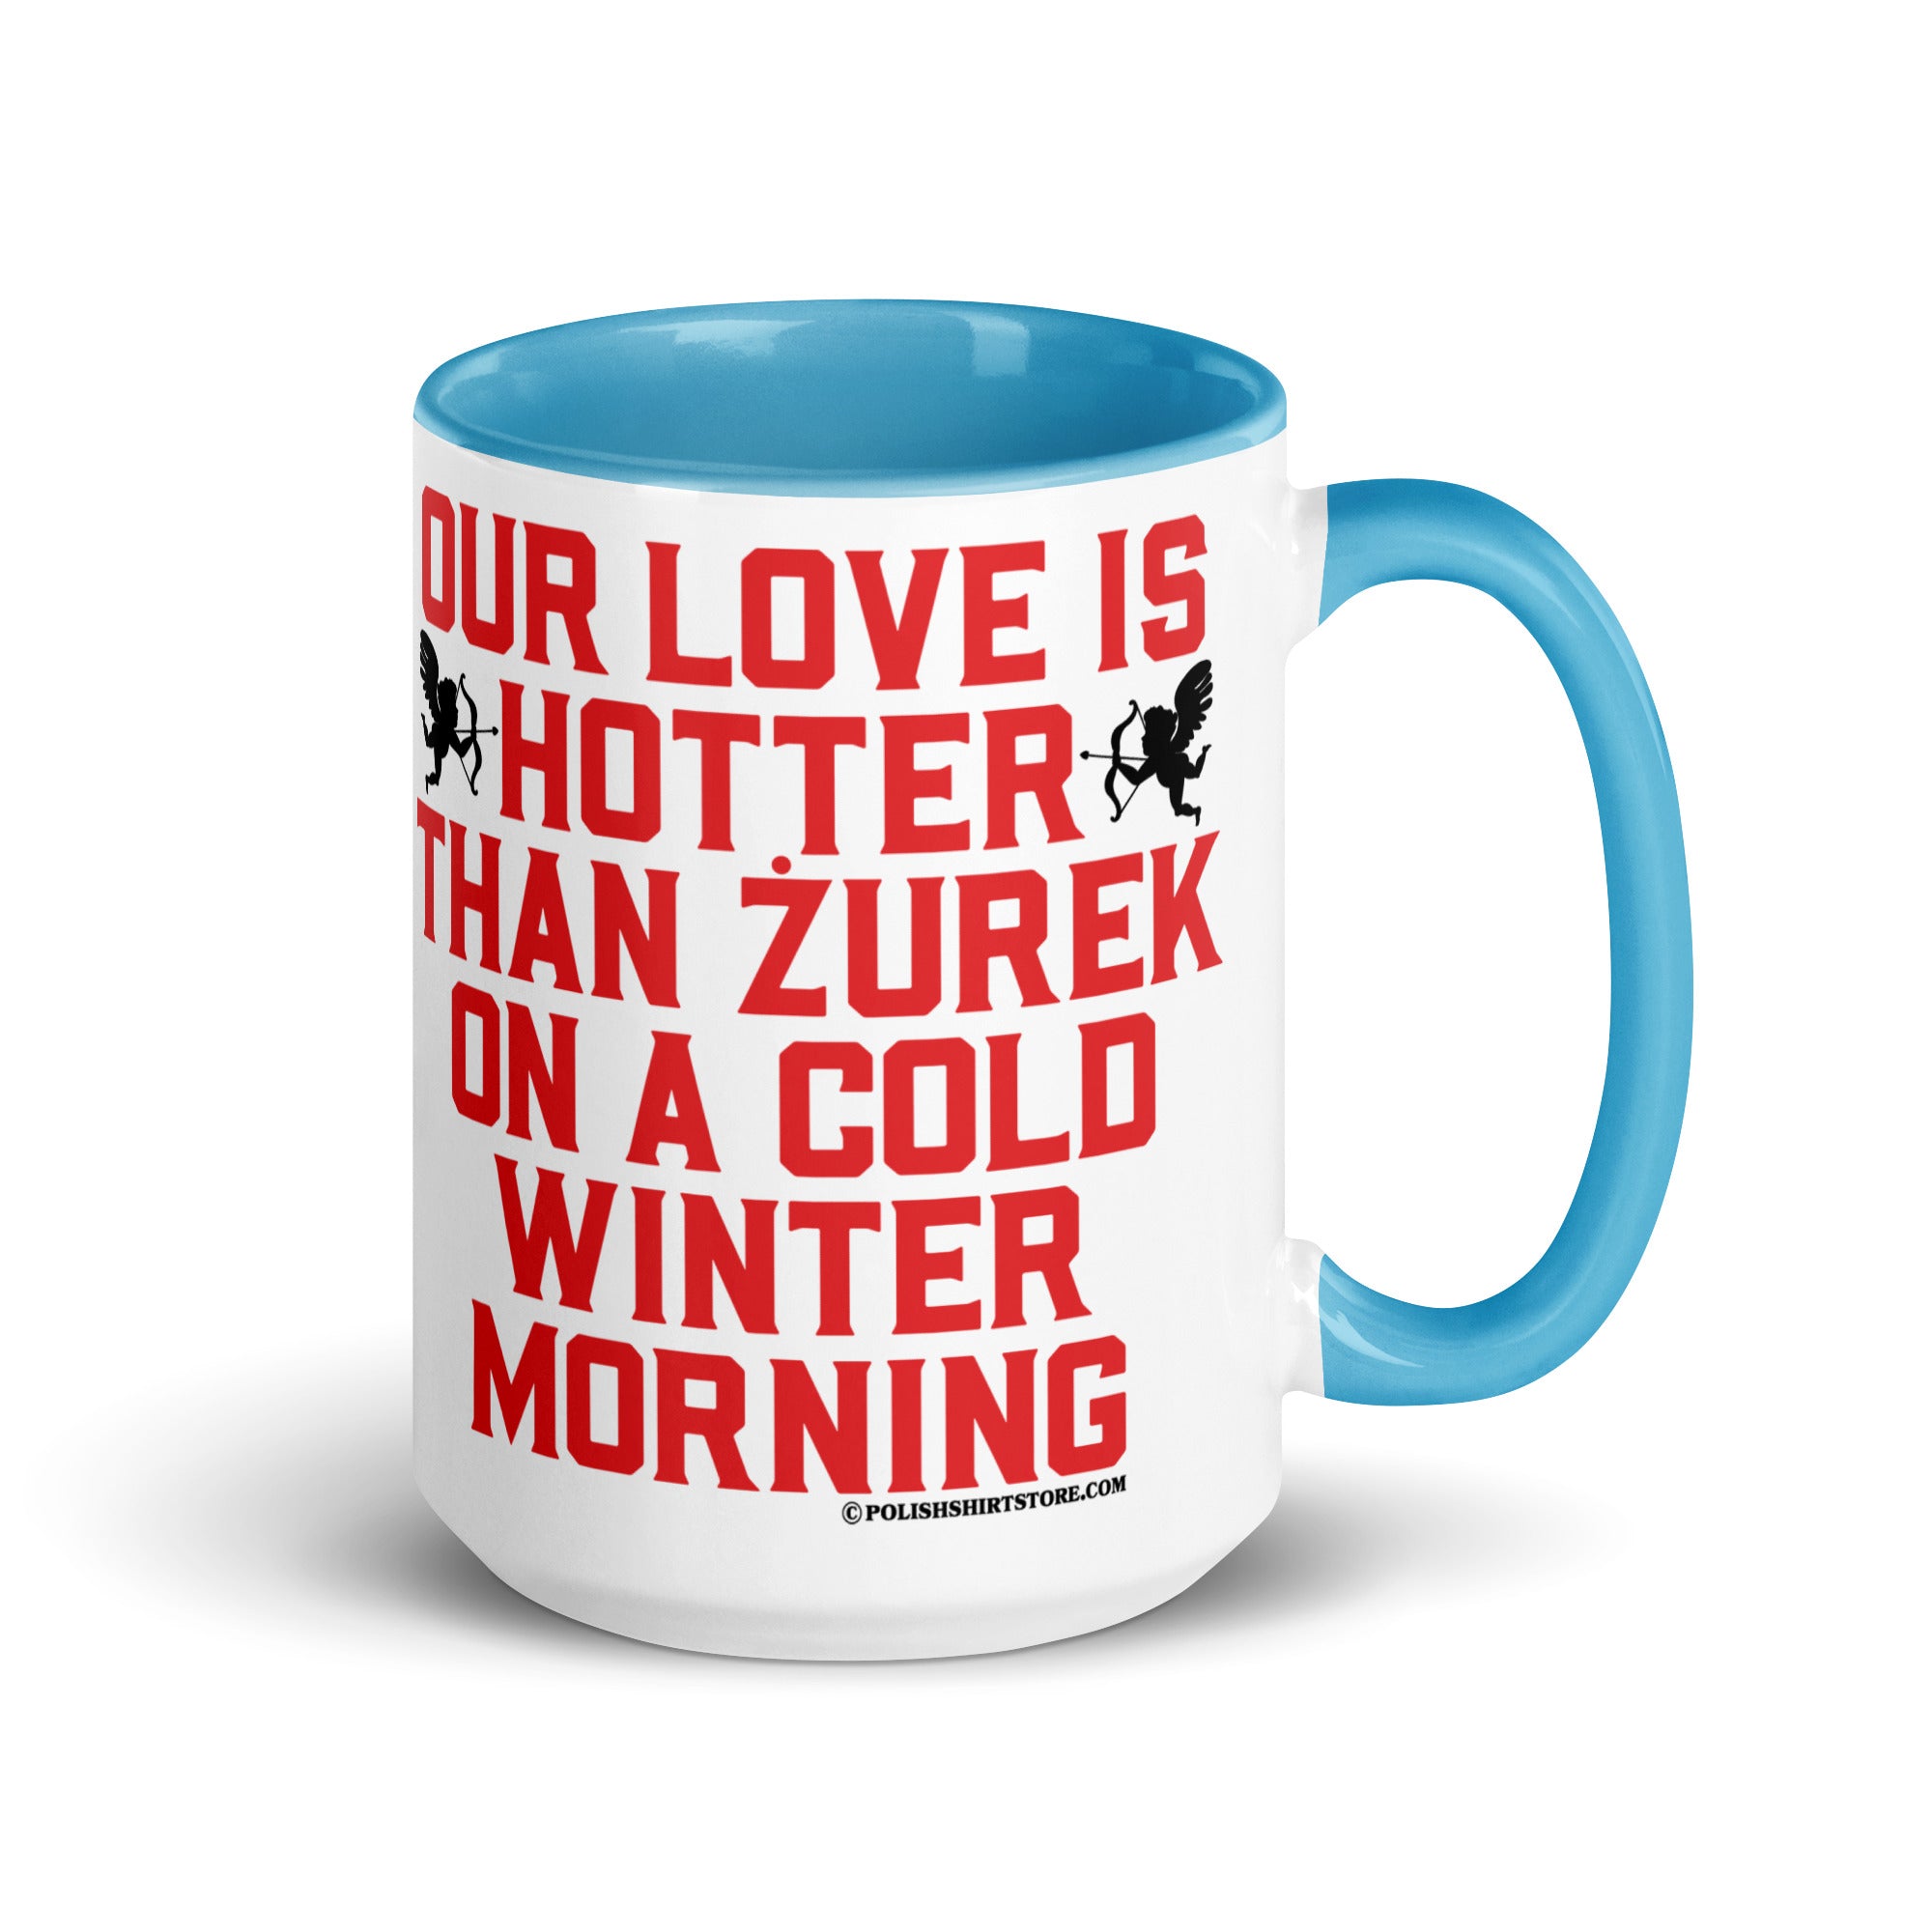 Our Love Is Hotter Than Zurek On A Cold Winter Morning Coffee Mug with Color Inside  Polish Shirt Store Blue 15 oz 